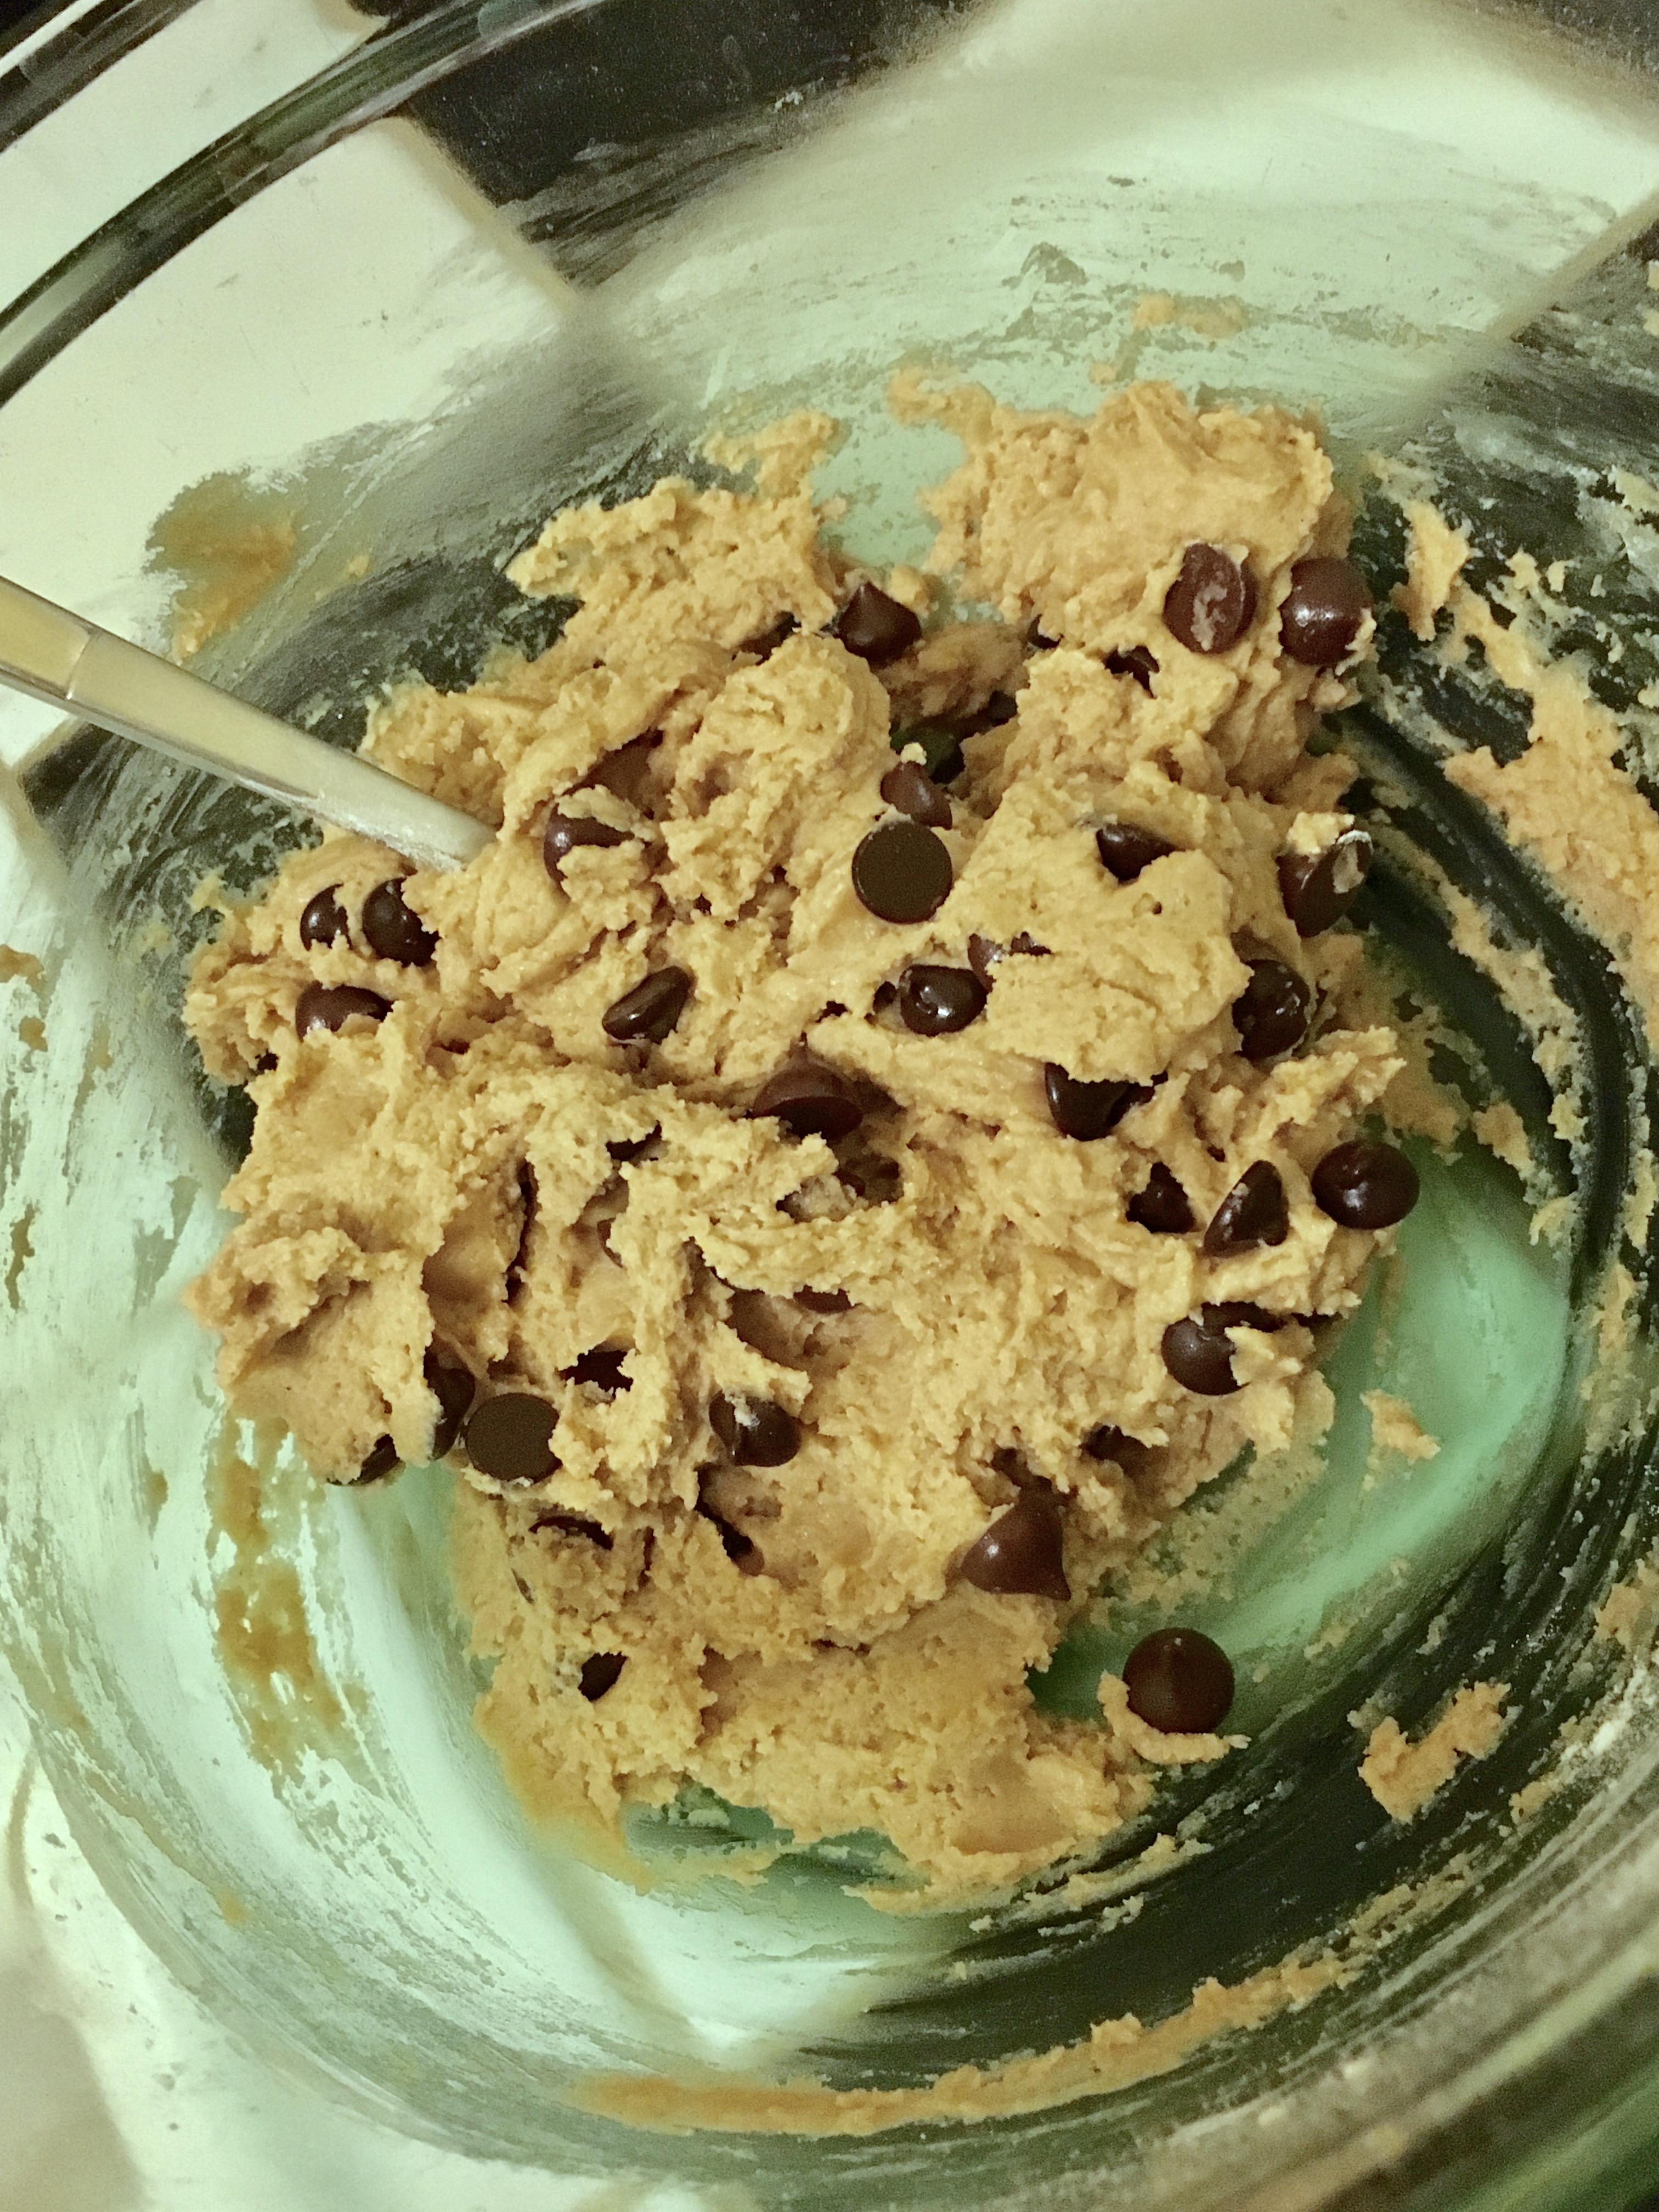 These low-sugar chocolate-coated Chocolate Chip Cookie Dough Treats take it to the next level with their protein-laced creamy filling!